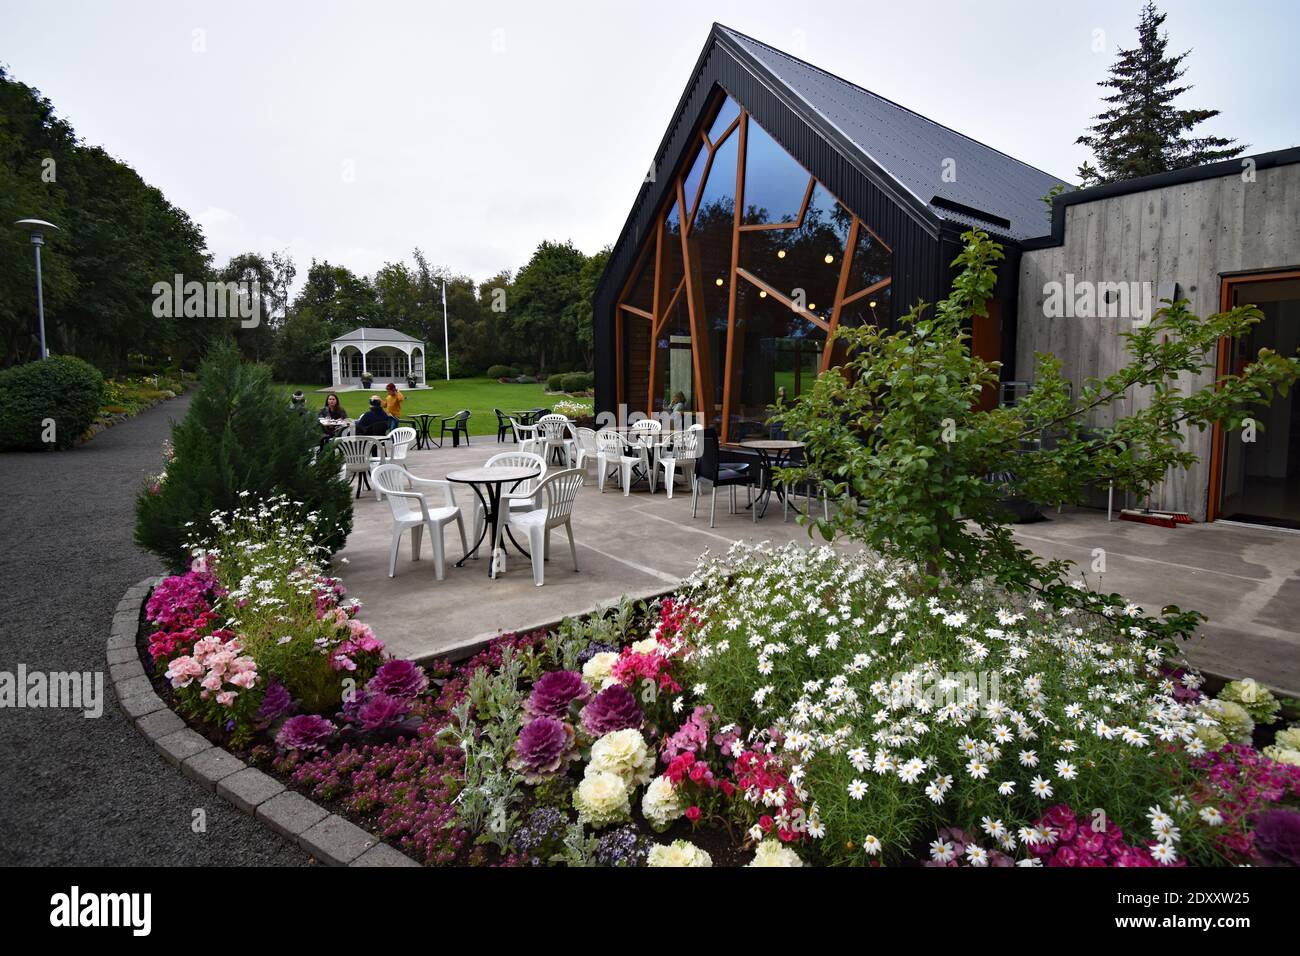 Café Laut in Akureyri Botanical Garden, Northern Iceland.  Flowerbeds surround the patio filled with chairs and tables in front of the modern building. Stock Photo